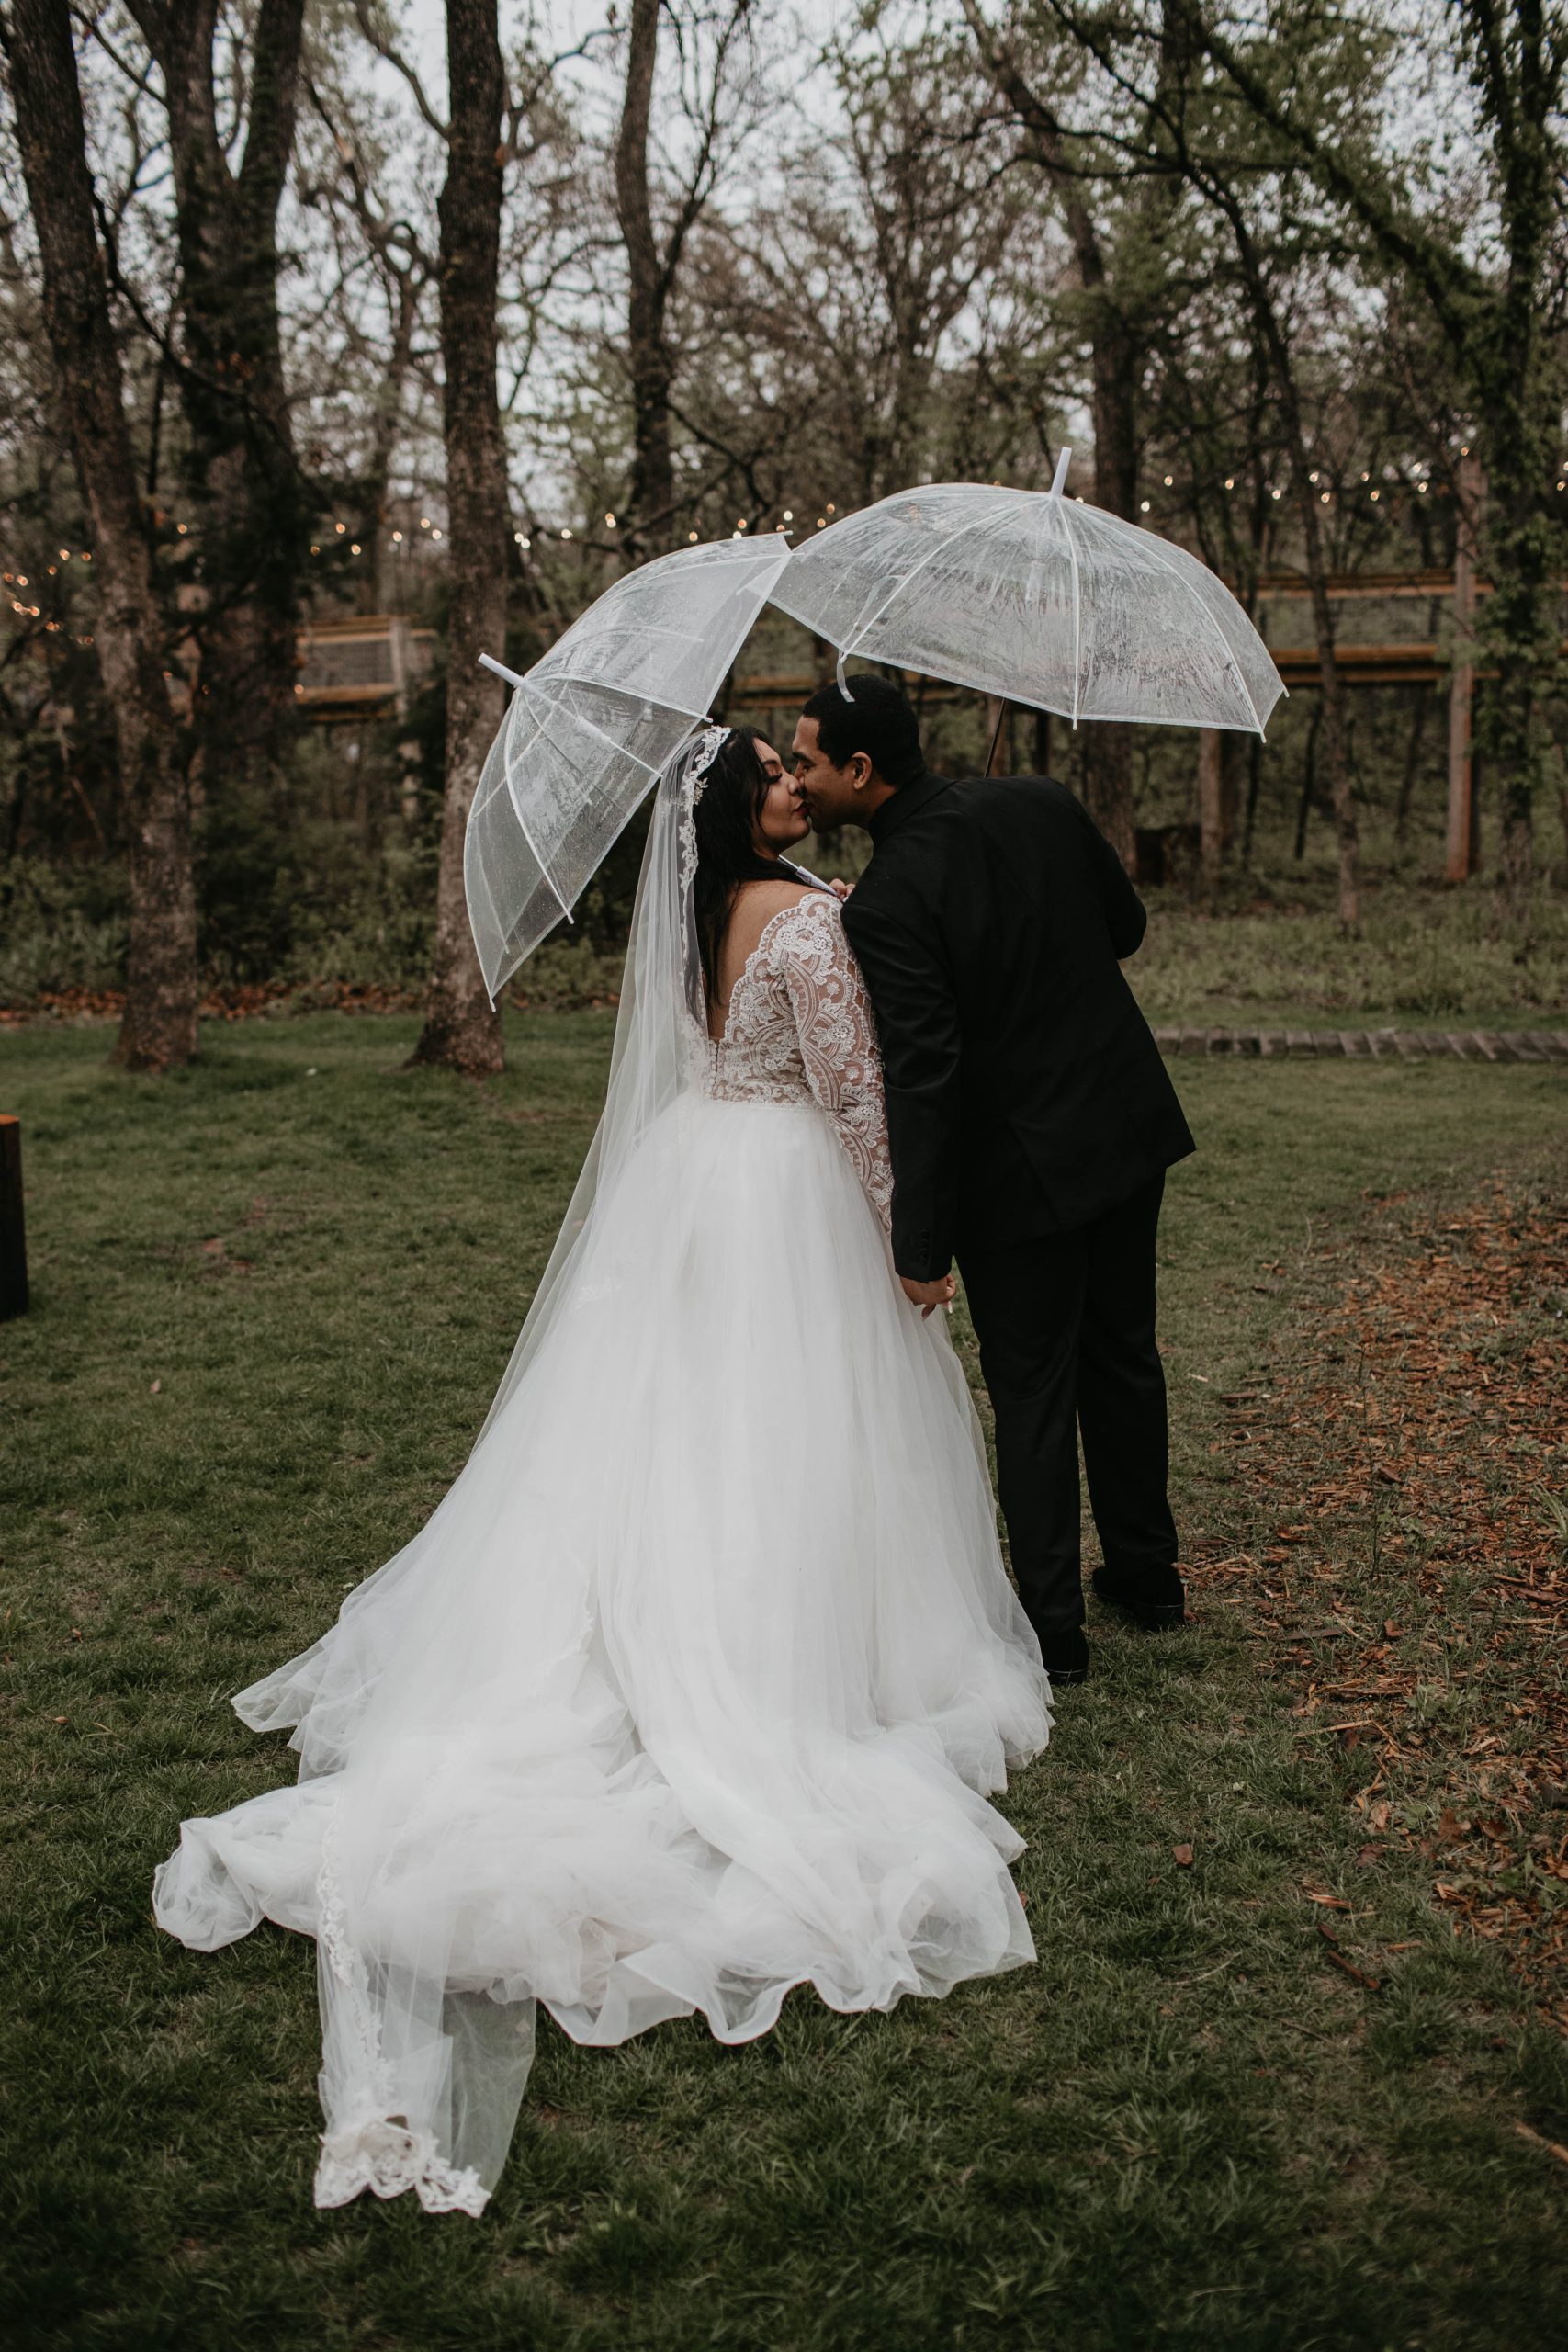 Bride In Lace Wedding Dress Called Mallory Dawn By Maggie Sottero In The Rain